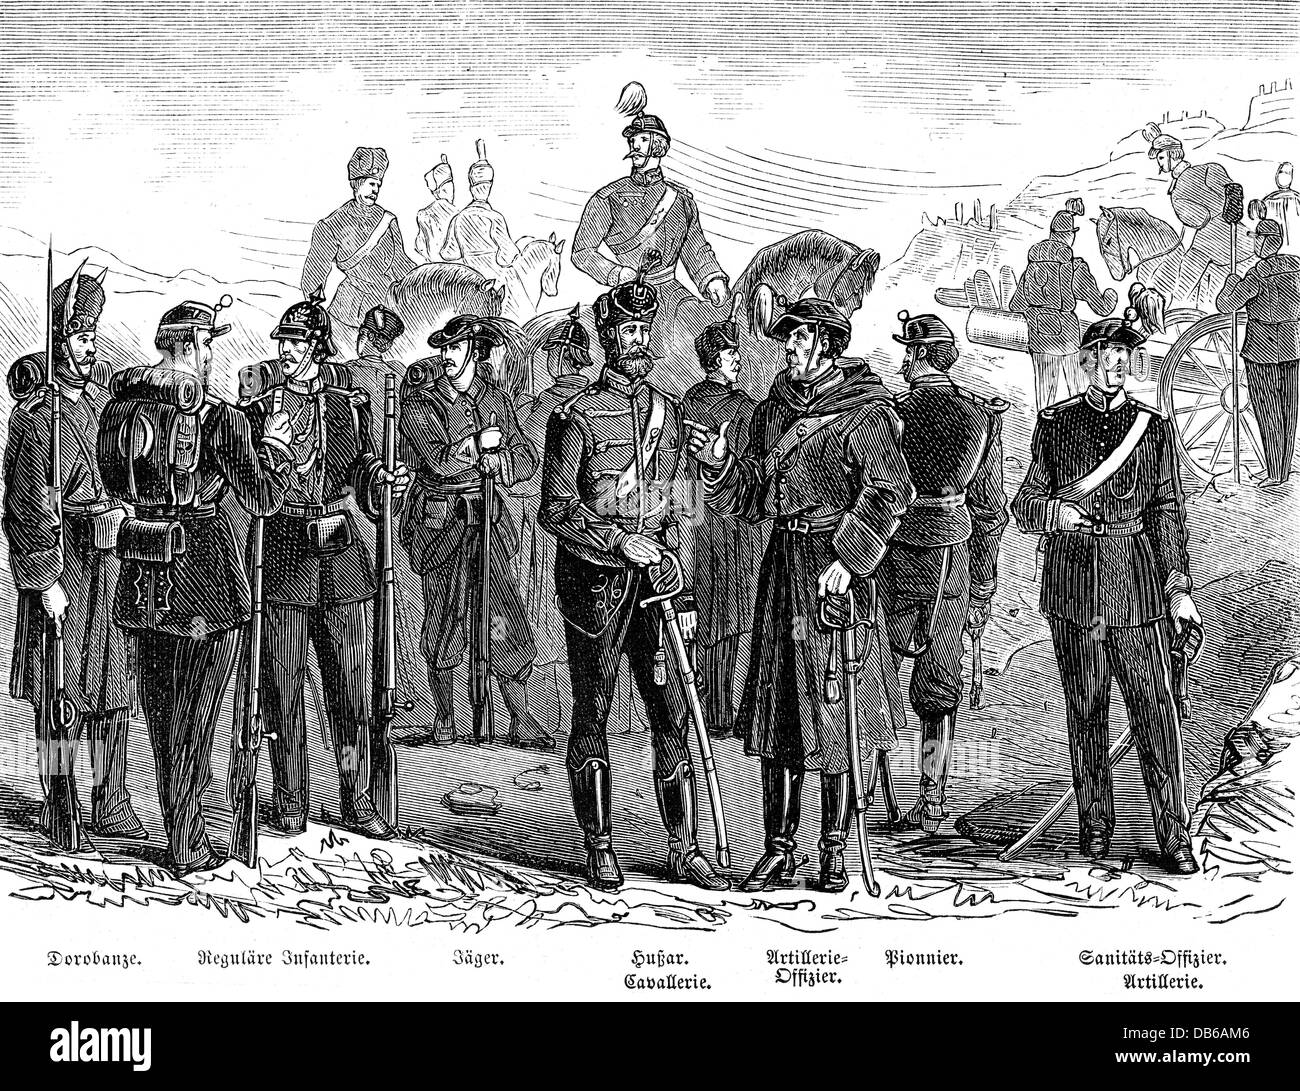 military,Romania,19th centurry,Romanian soldiers from the time of the Great Eastern Crisis,1875 - 1878,contemporary wood engraving,Rumania,Rumanian,19th century,soldier,soldiers,troops,army,armies,war,oriental crisis,war in the Orient 1876/1877,infantry,infantryman,infantrymen,rifleman,riflemen,hussar,hussars,cavalry,cavalries,artillery officer,artillery,engineer,Sapper,the engineers,medical officers,senior medical officer,artilleryman,artillerymen,medical service,first aid,officers,officer,uniform,uniforms,weapons,arms,Additional-Rights-Clearences-Not Available Stock Photo